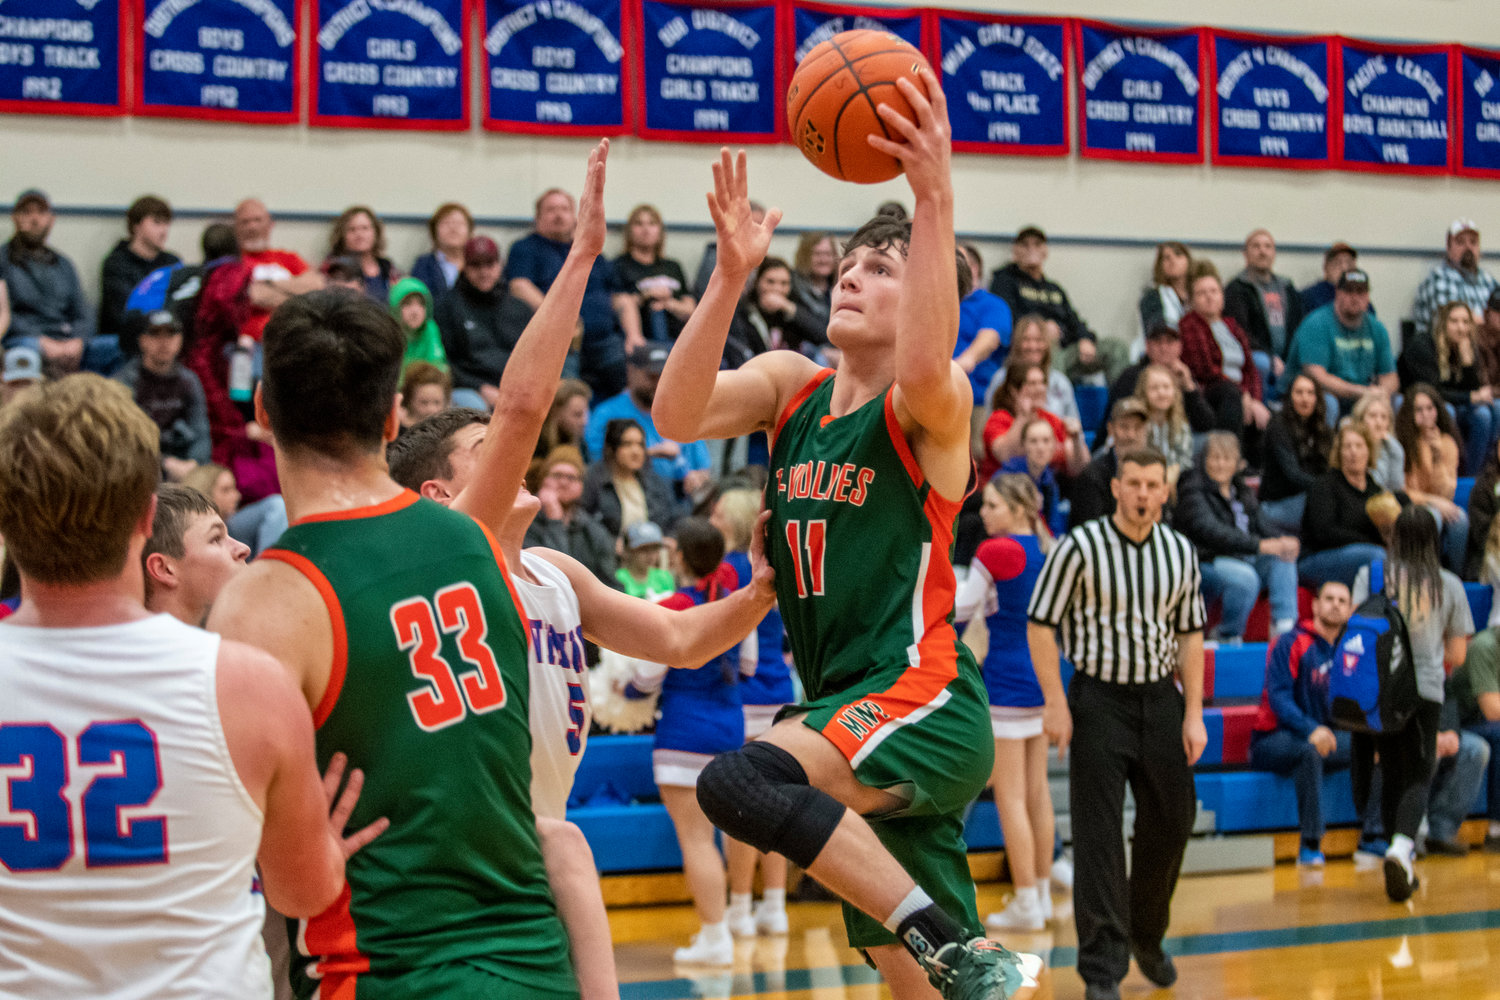 Morton-White Pass senior Hunter Hazen (11) drives to the hoop against Willapa Valley at the Jack Q. Pearson Holiday Classic in Menlo on Dec. 29.